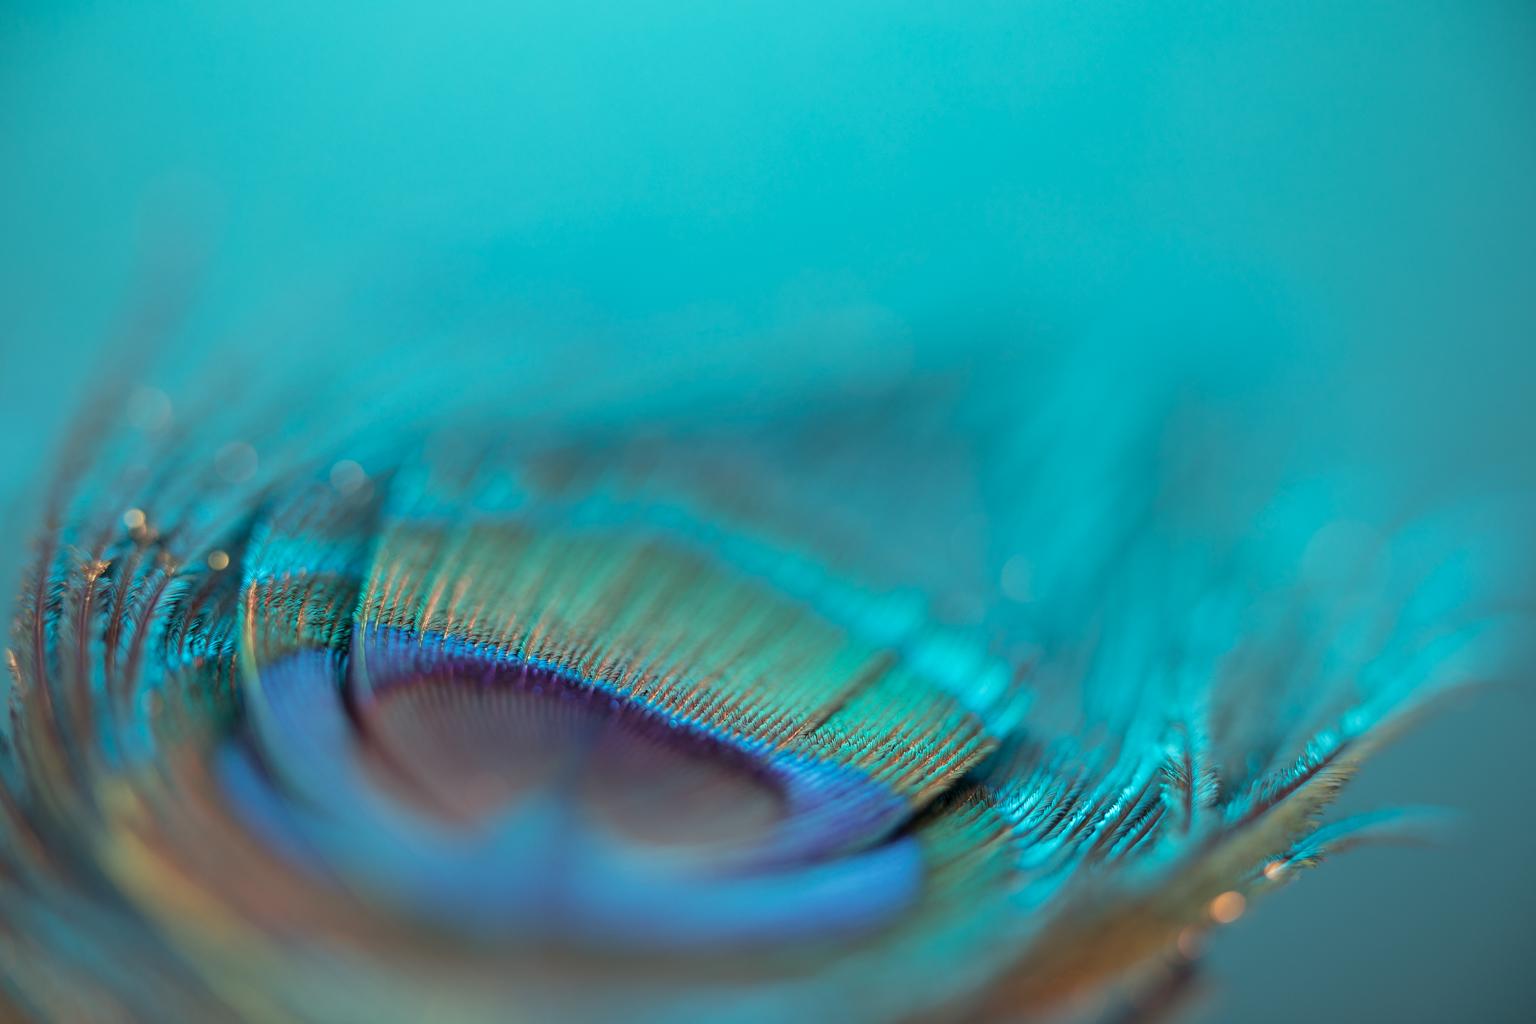 Ralph Daher Color Photograph - Turquoise (48 x 72") - Album: Look No "Feather" - Contemporary - Peacock